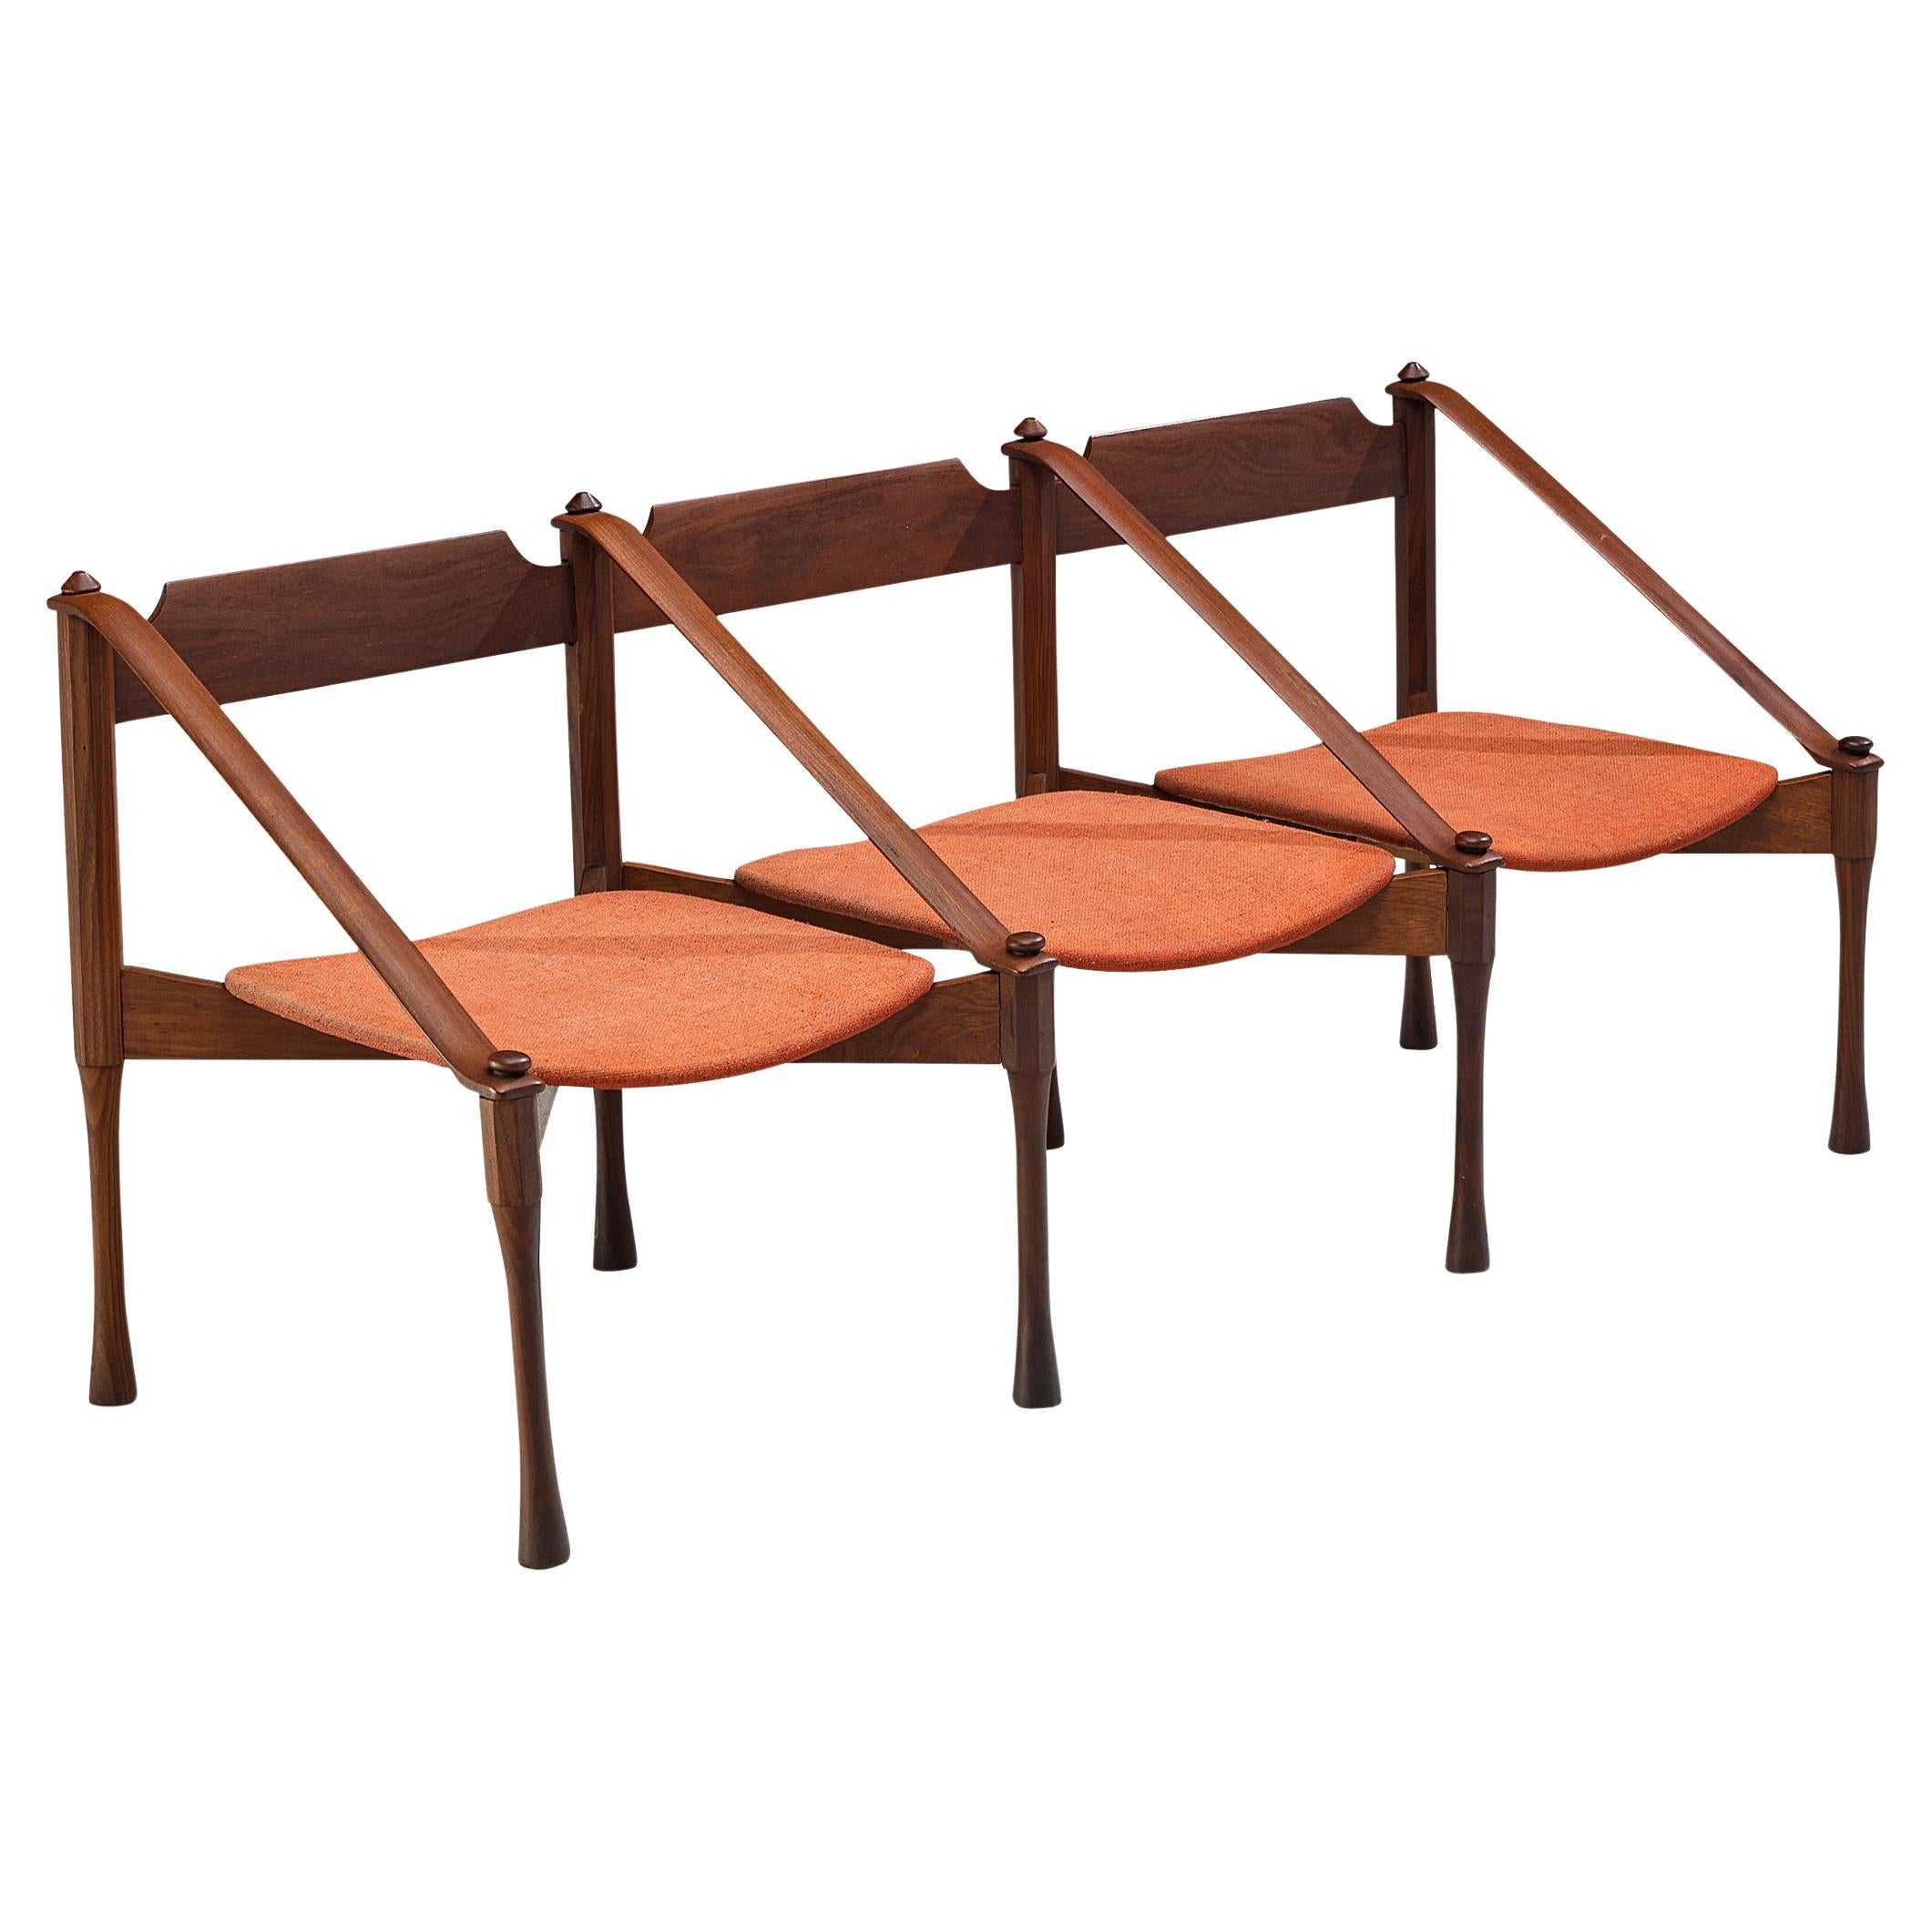 Giulio Moscatelli Bench in Teak and Red Upholstery 